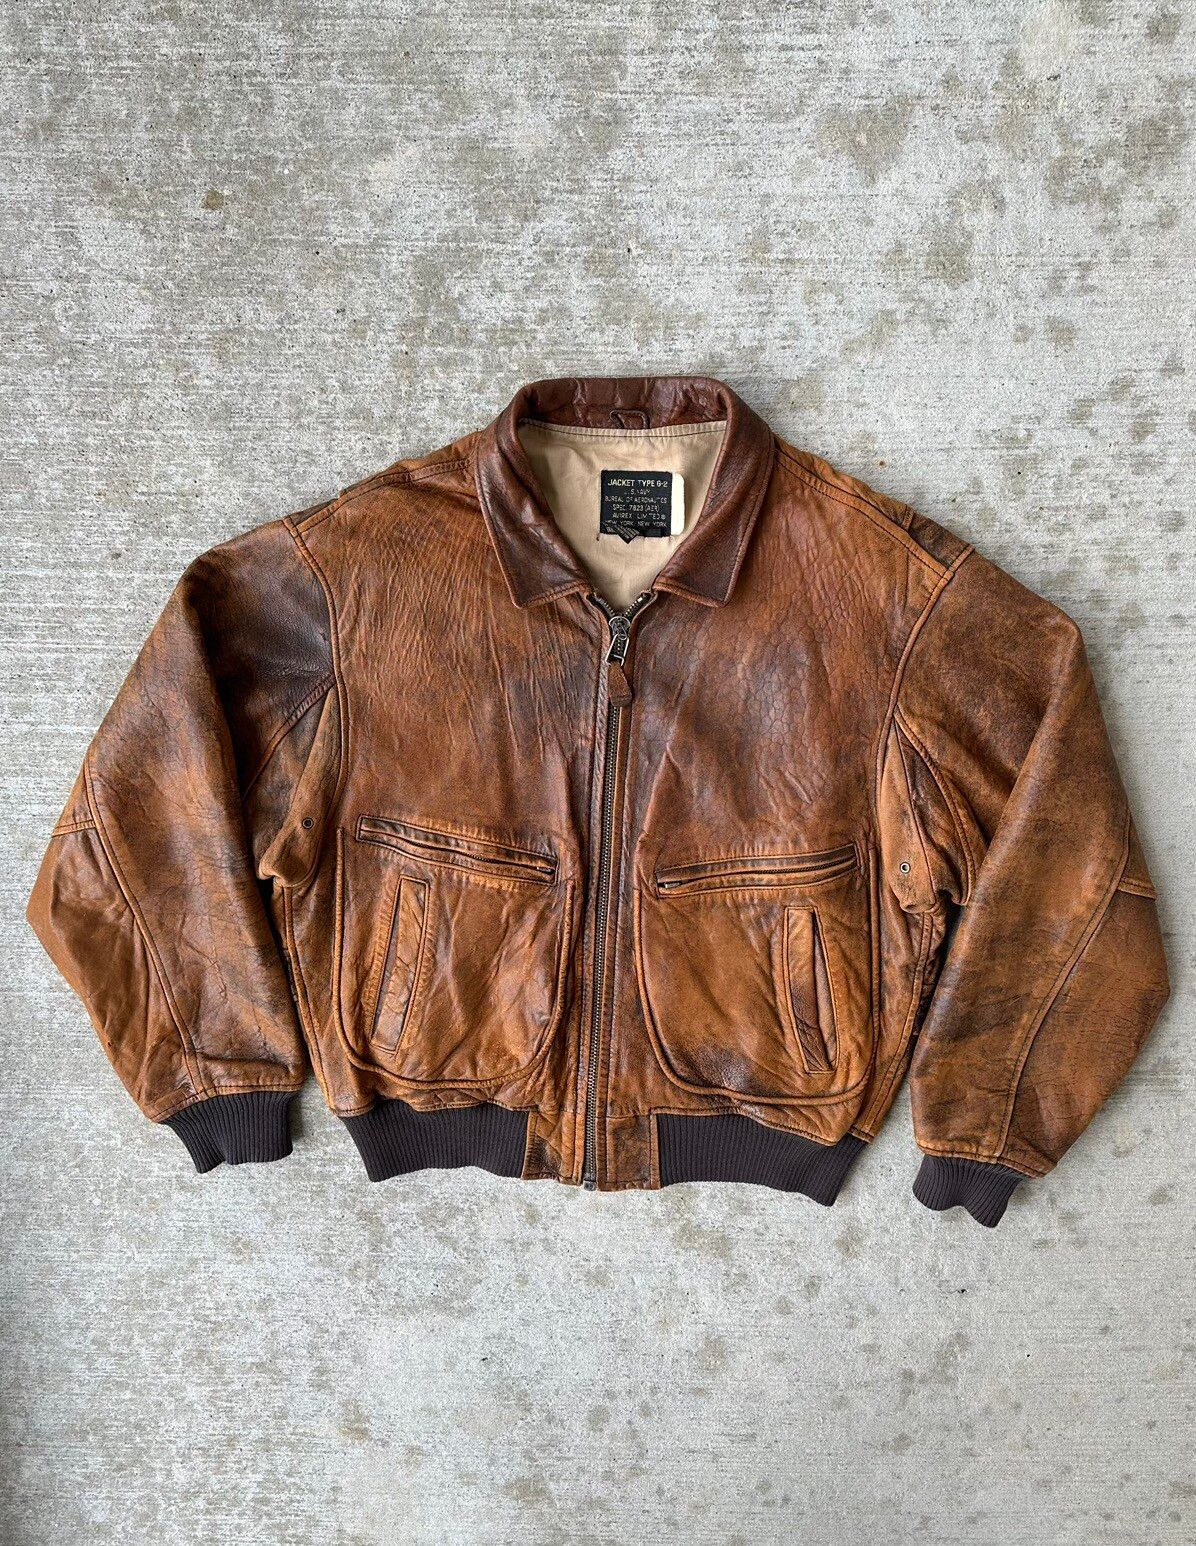 Vintage Avirex Type G-2 Faded Military Leather Flight Jacket | Grailed